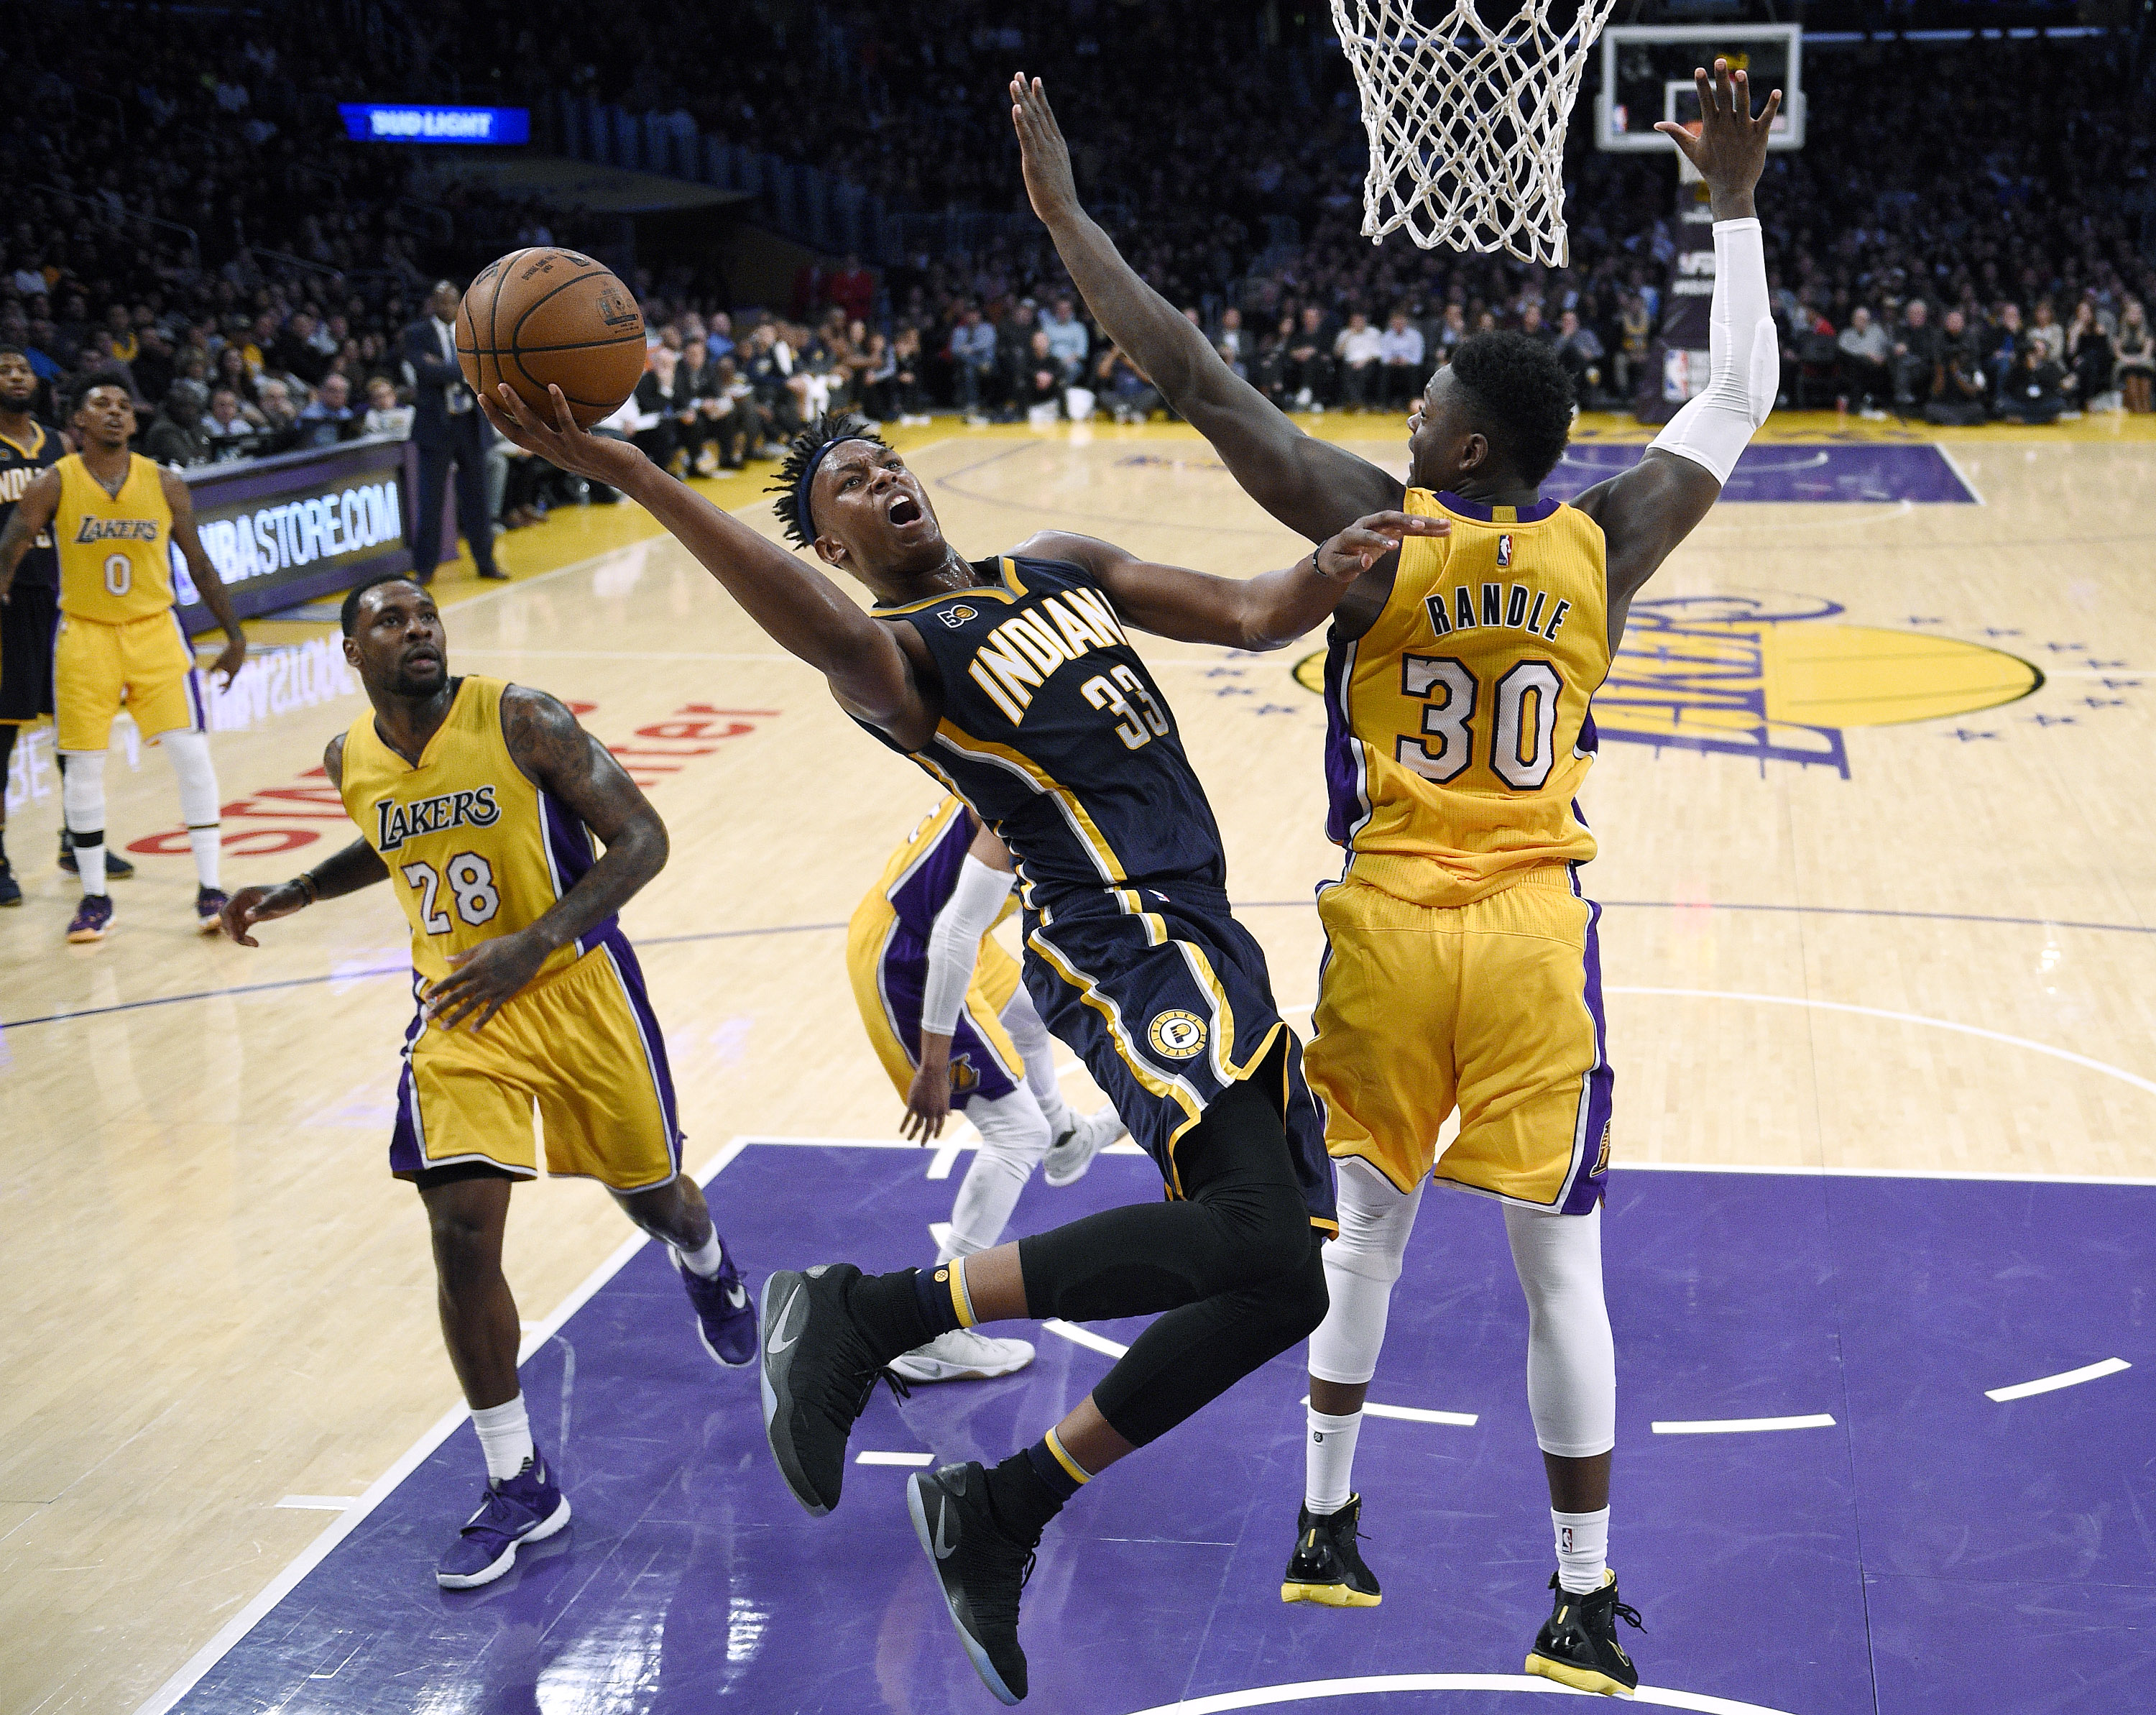 Los Angeles Lakers vs Indiana Pacers How to watch NBA online